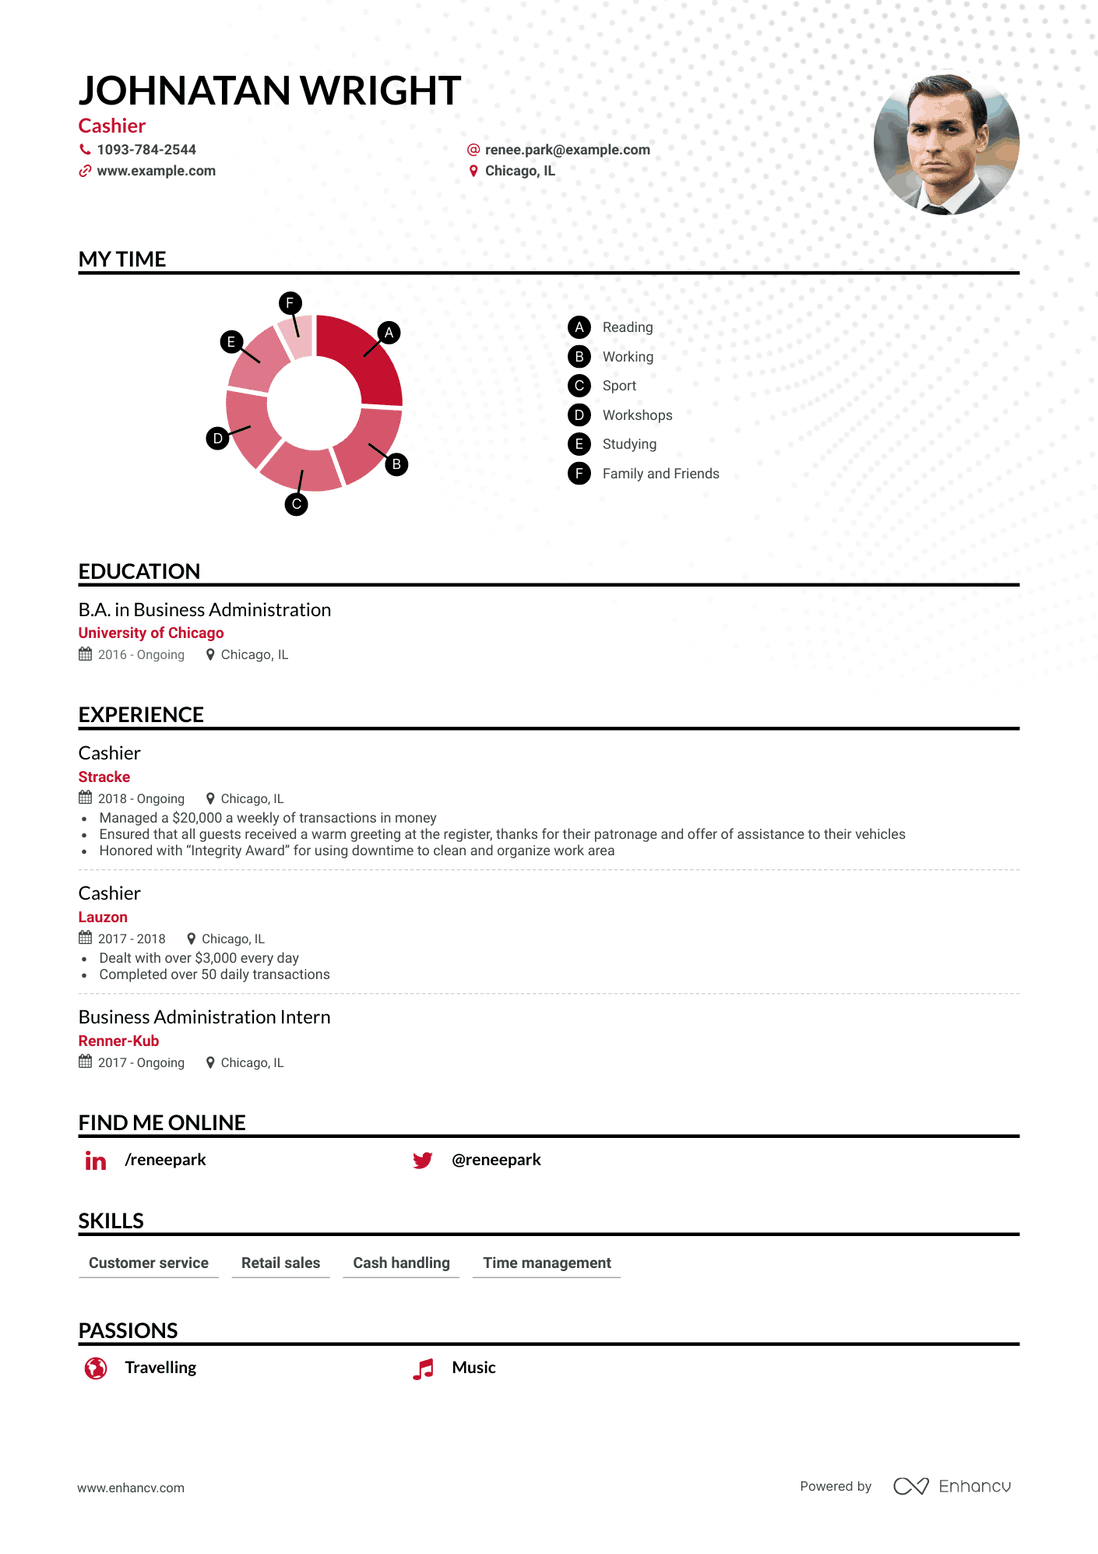 Classic Cashier Resume Template